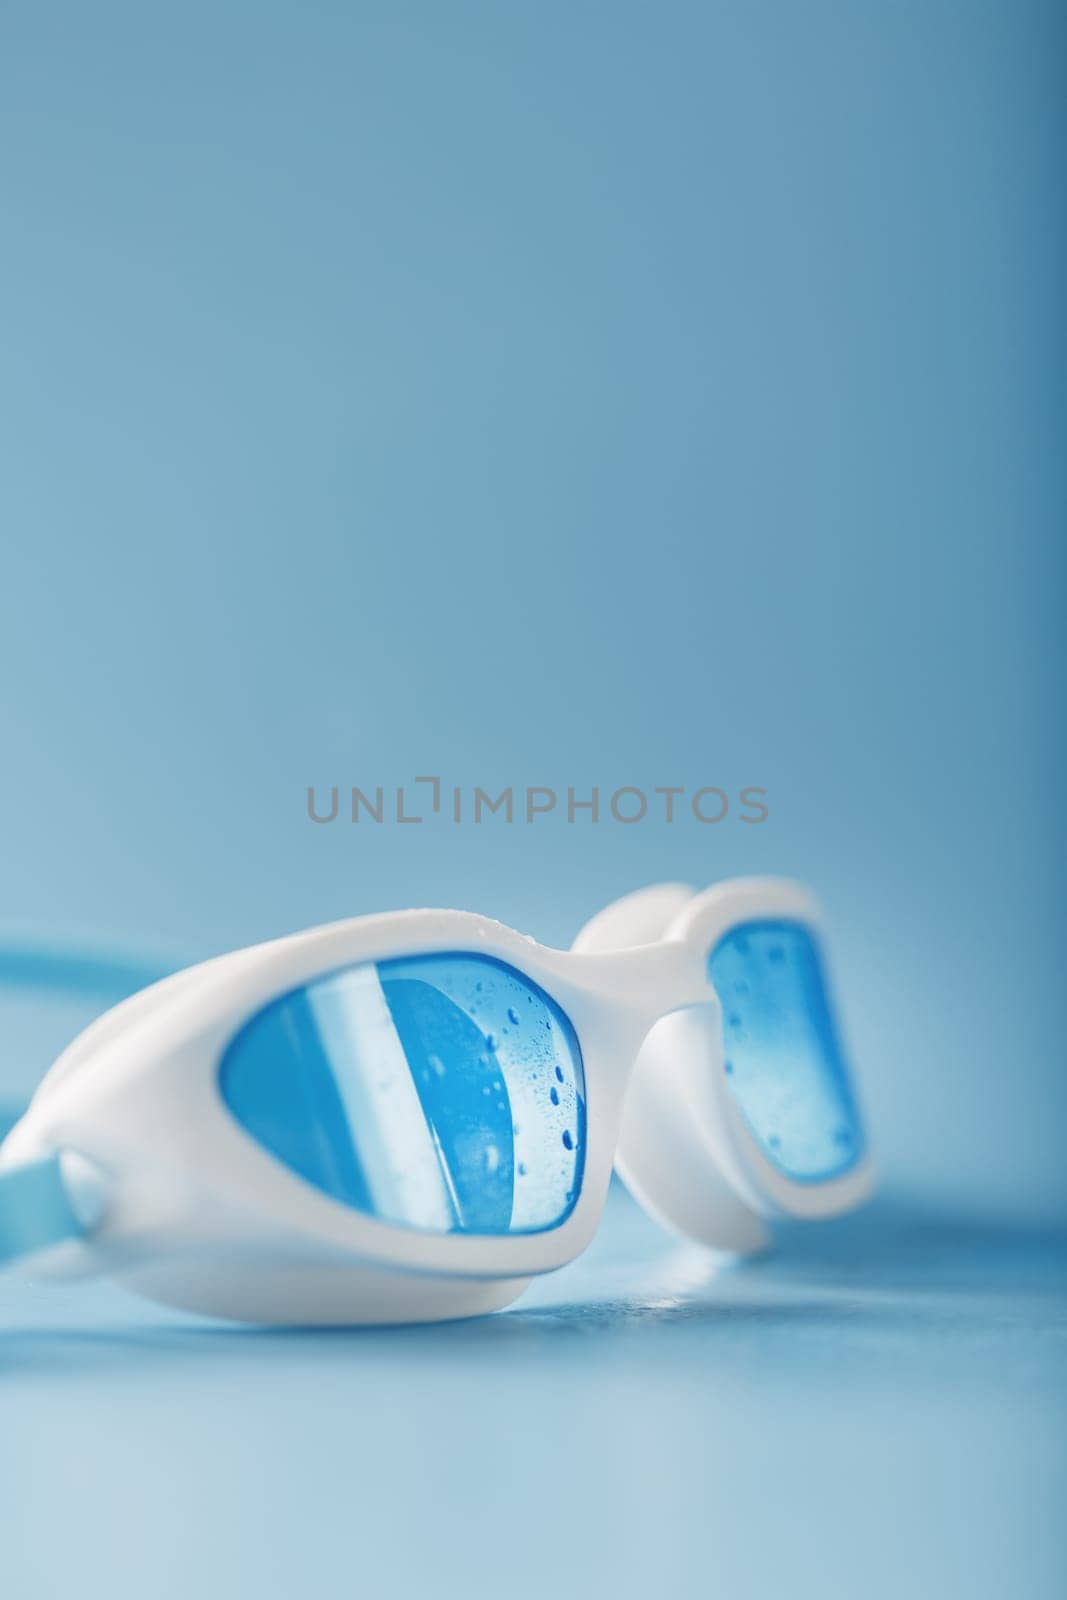 White swimming glasses with a blue lens on a blue background